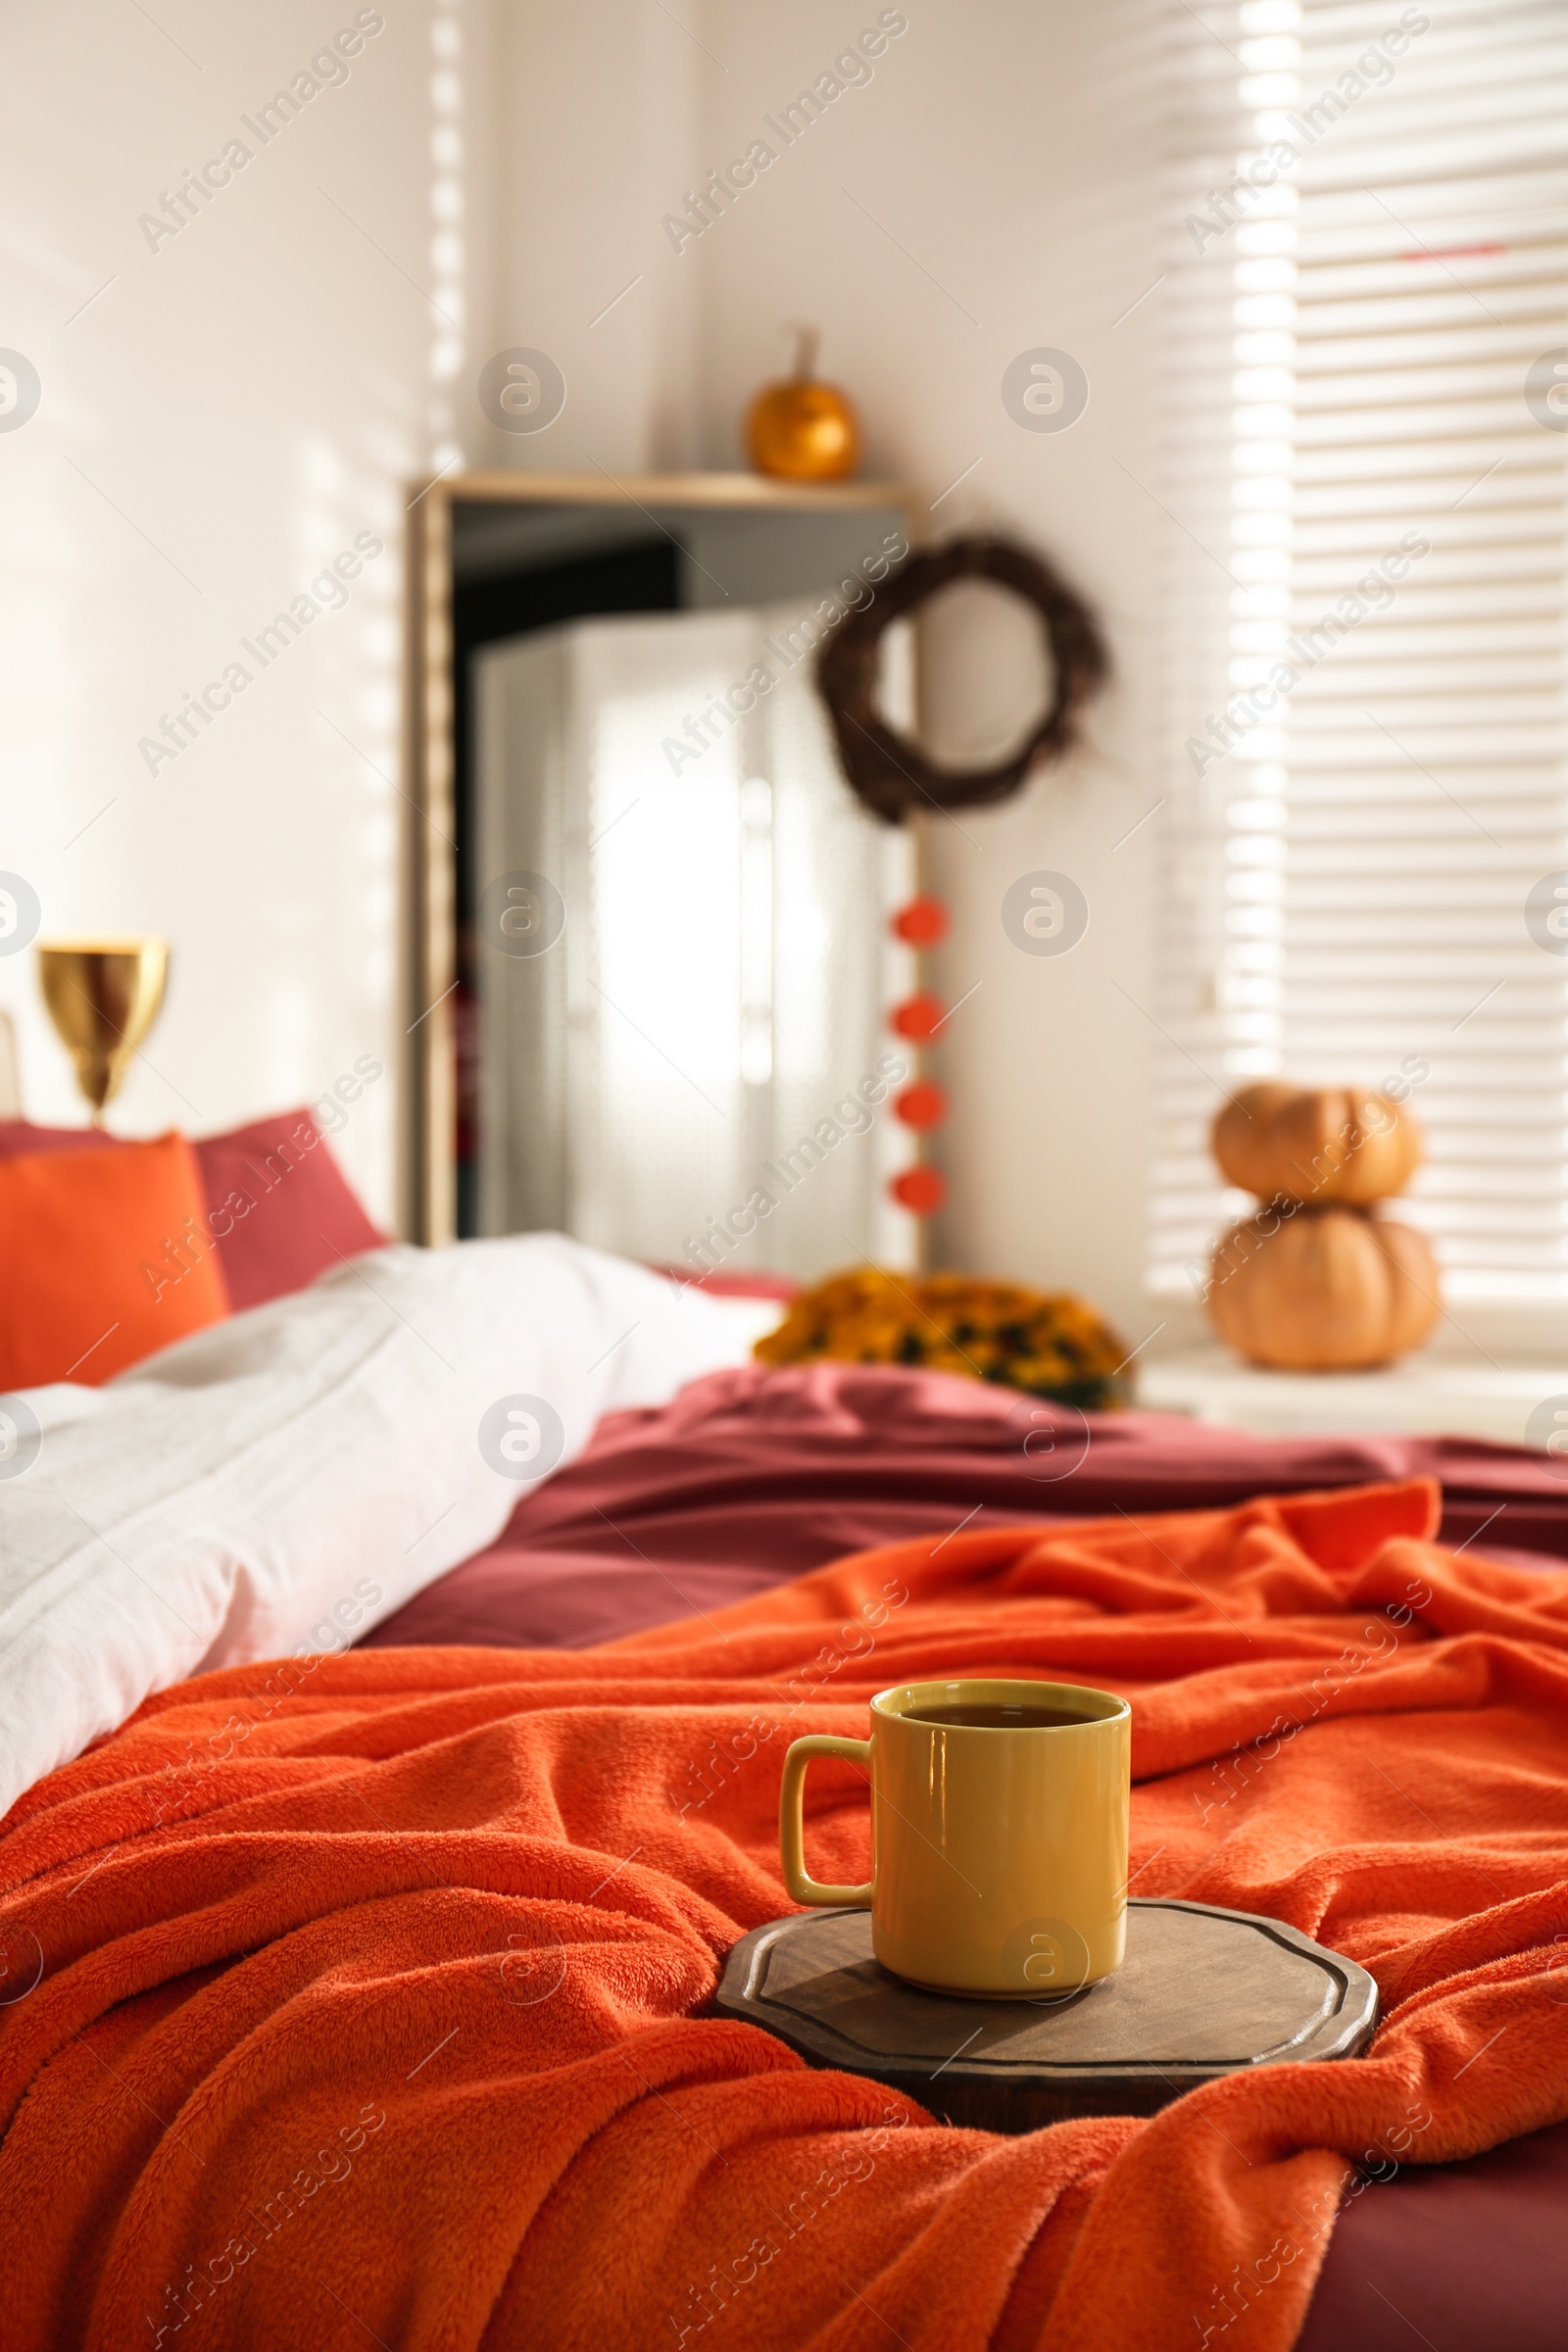 Photo of Hot drink on bed with orange blanket at home. Idea for decor in autumn colors